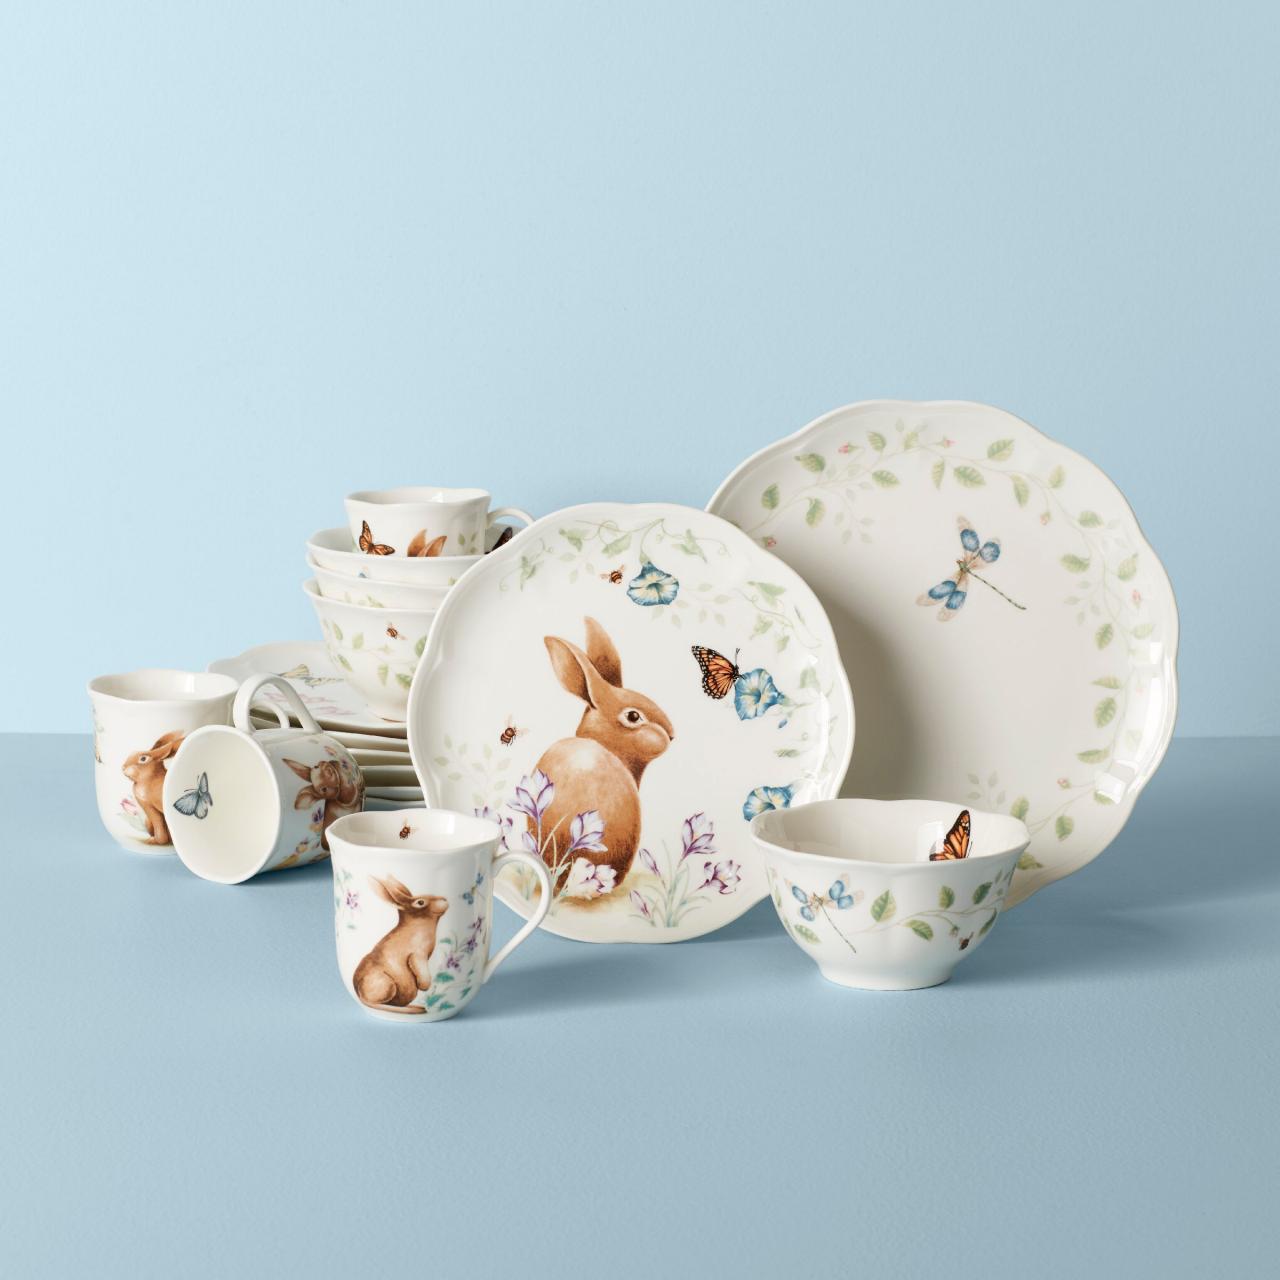 https://food.fnr.sndimg.com/content/dam/images/food/products/2023/3/23/rx_butterfly-meadow-bunny-16-piece-set.jpeg.rend.hgtvcom.1280.1280.suffix/1679579640538.jpeg